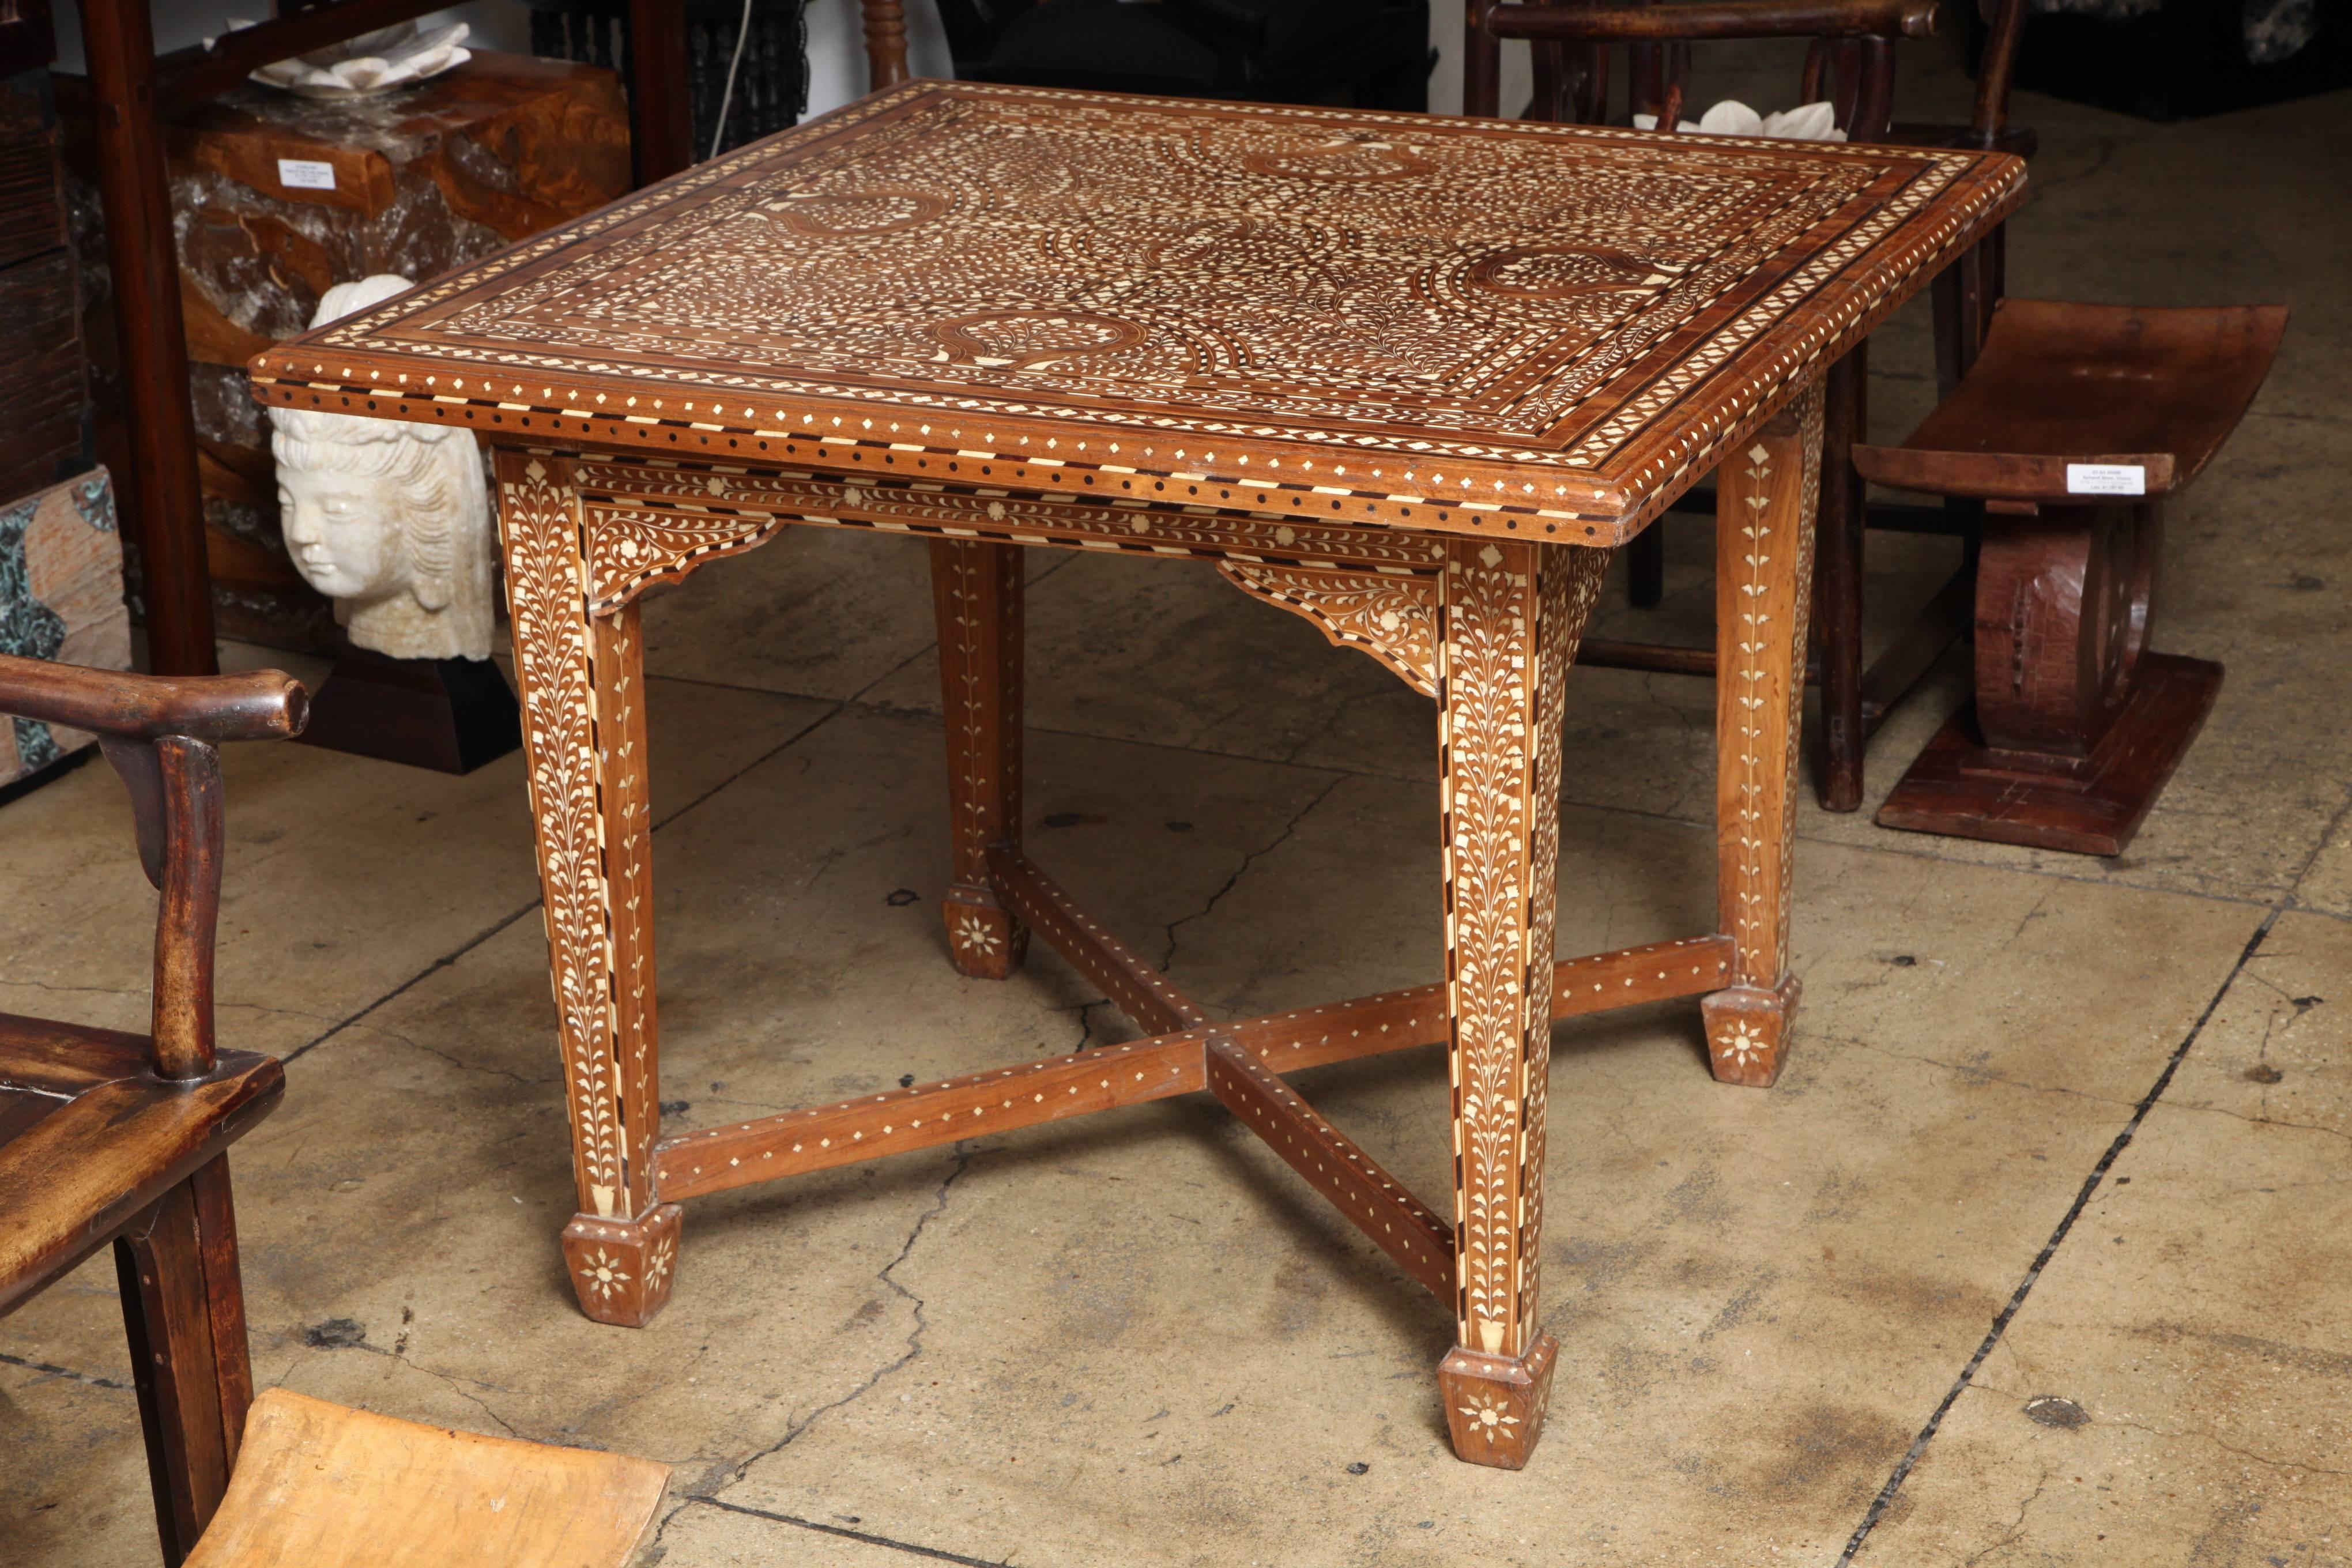 A square bone inlaid table from India with Classic patterns.